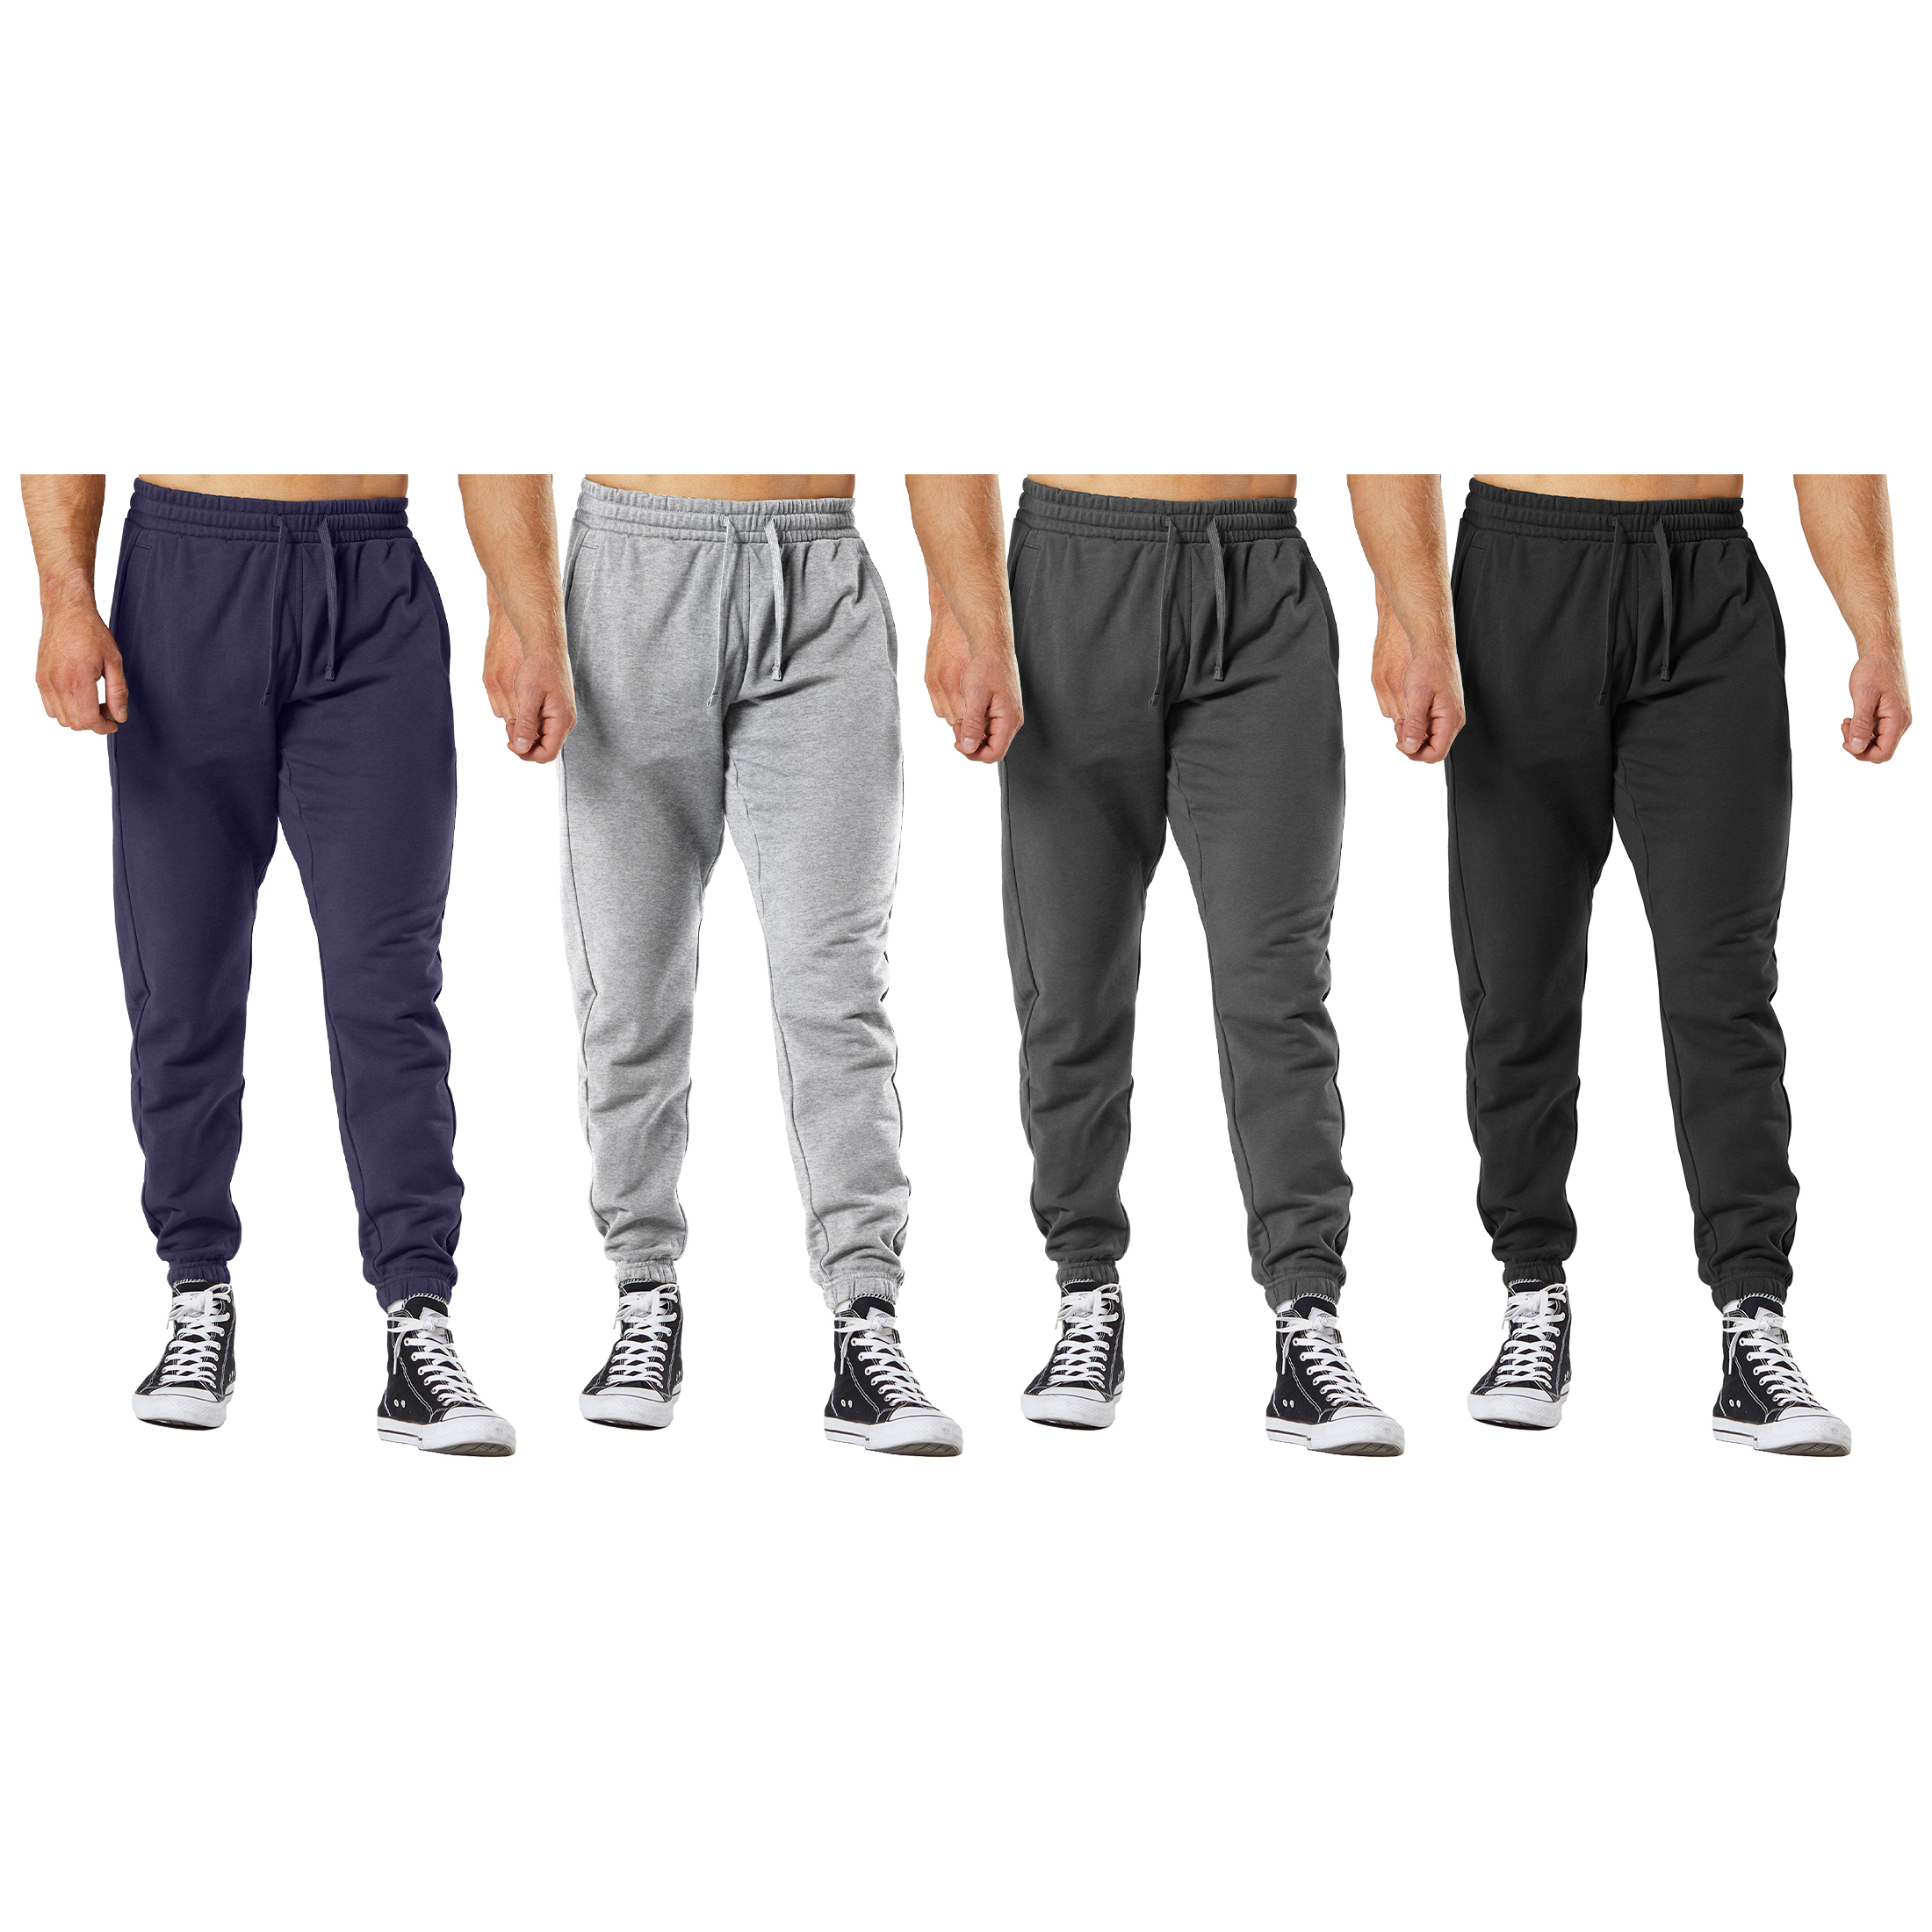 2-Pack: Men's Casual Fleece-Lined Elastic Bottom Jogger Pants With Pockets - Small